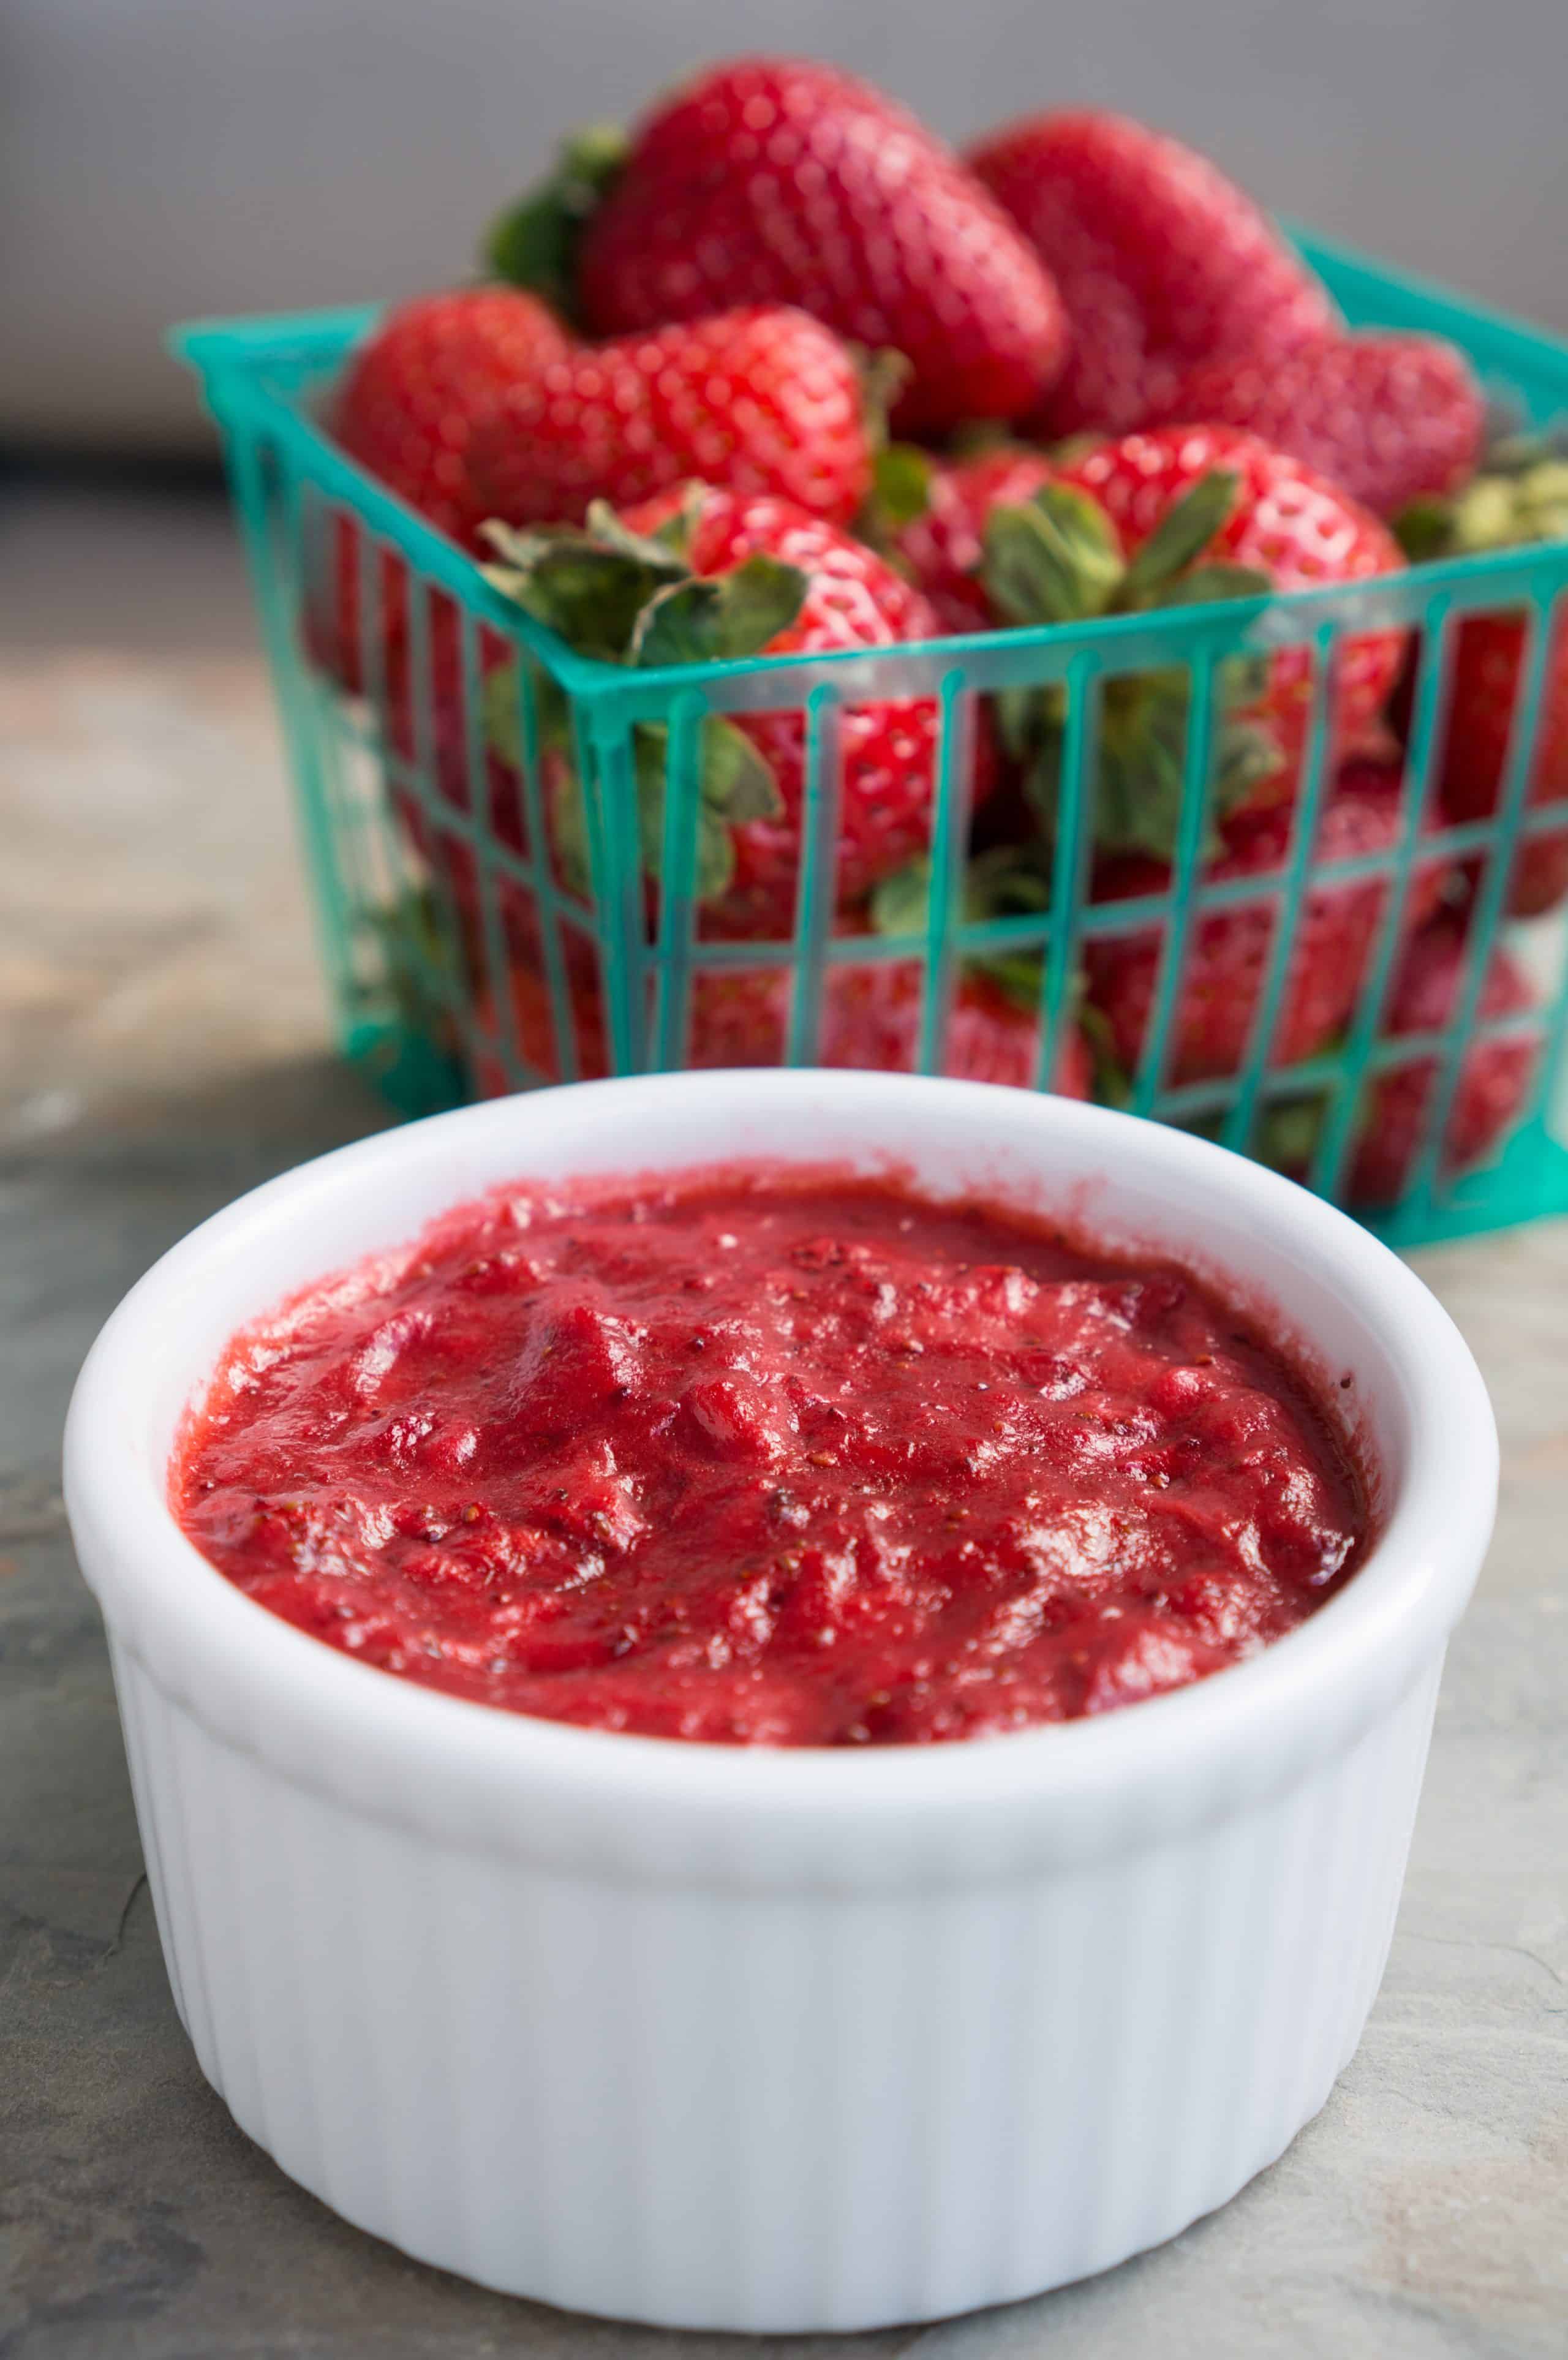 Roasted Strawberry Sauce - This easy 4-ingredient recipe for Roasted Strawberry Sauce uses fresh strawberries, honey, coconut oil, & a squeeze of lemon juice! Slather this sauce on French toast or pancakes, layer it in yogurt parfaits, or enjoy it on ice cream. We love that this real fruit spread is gluten free AND refined sugar free. ♥ | freeyourfork.com